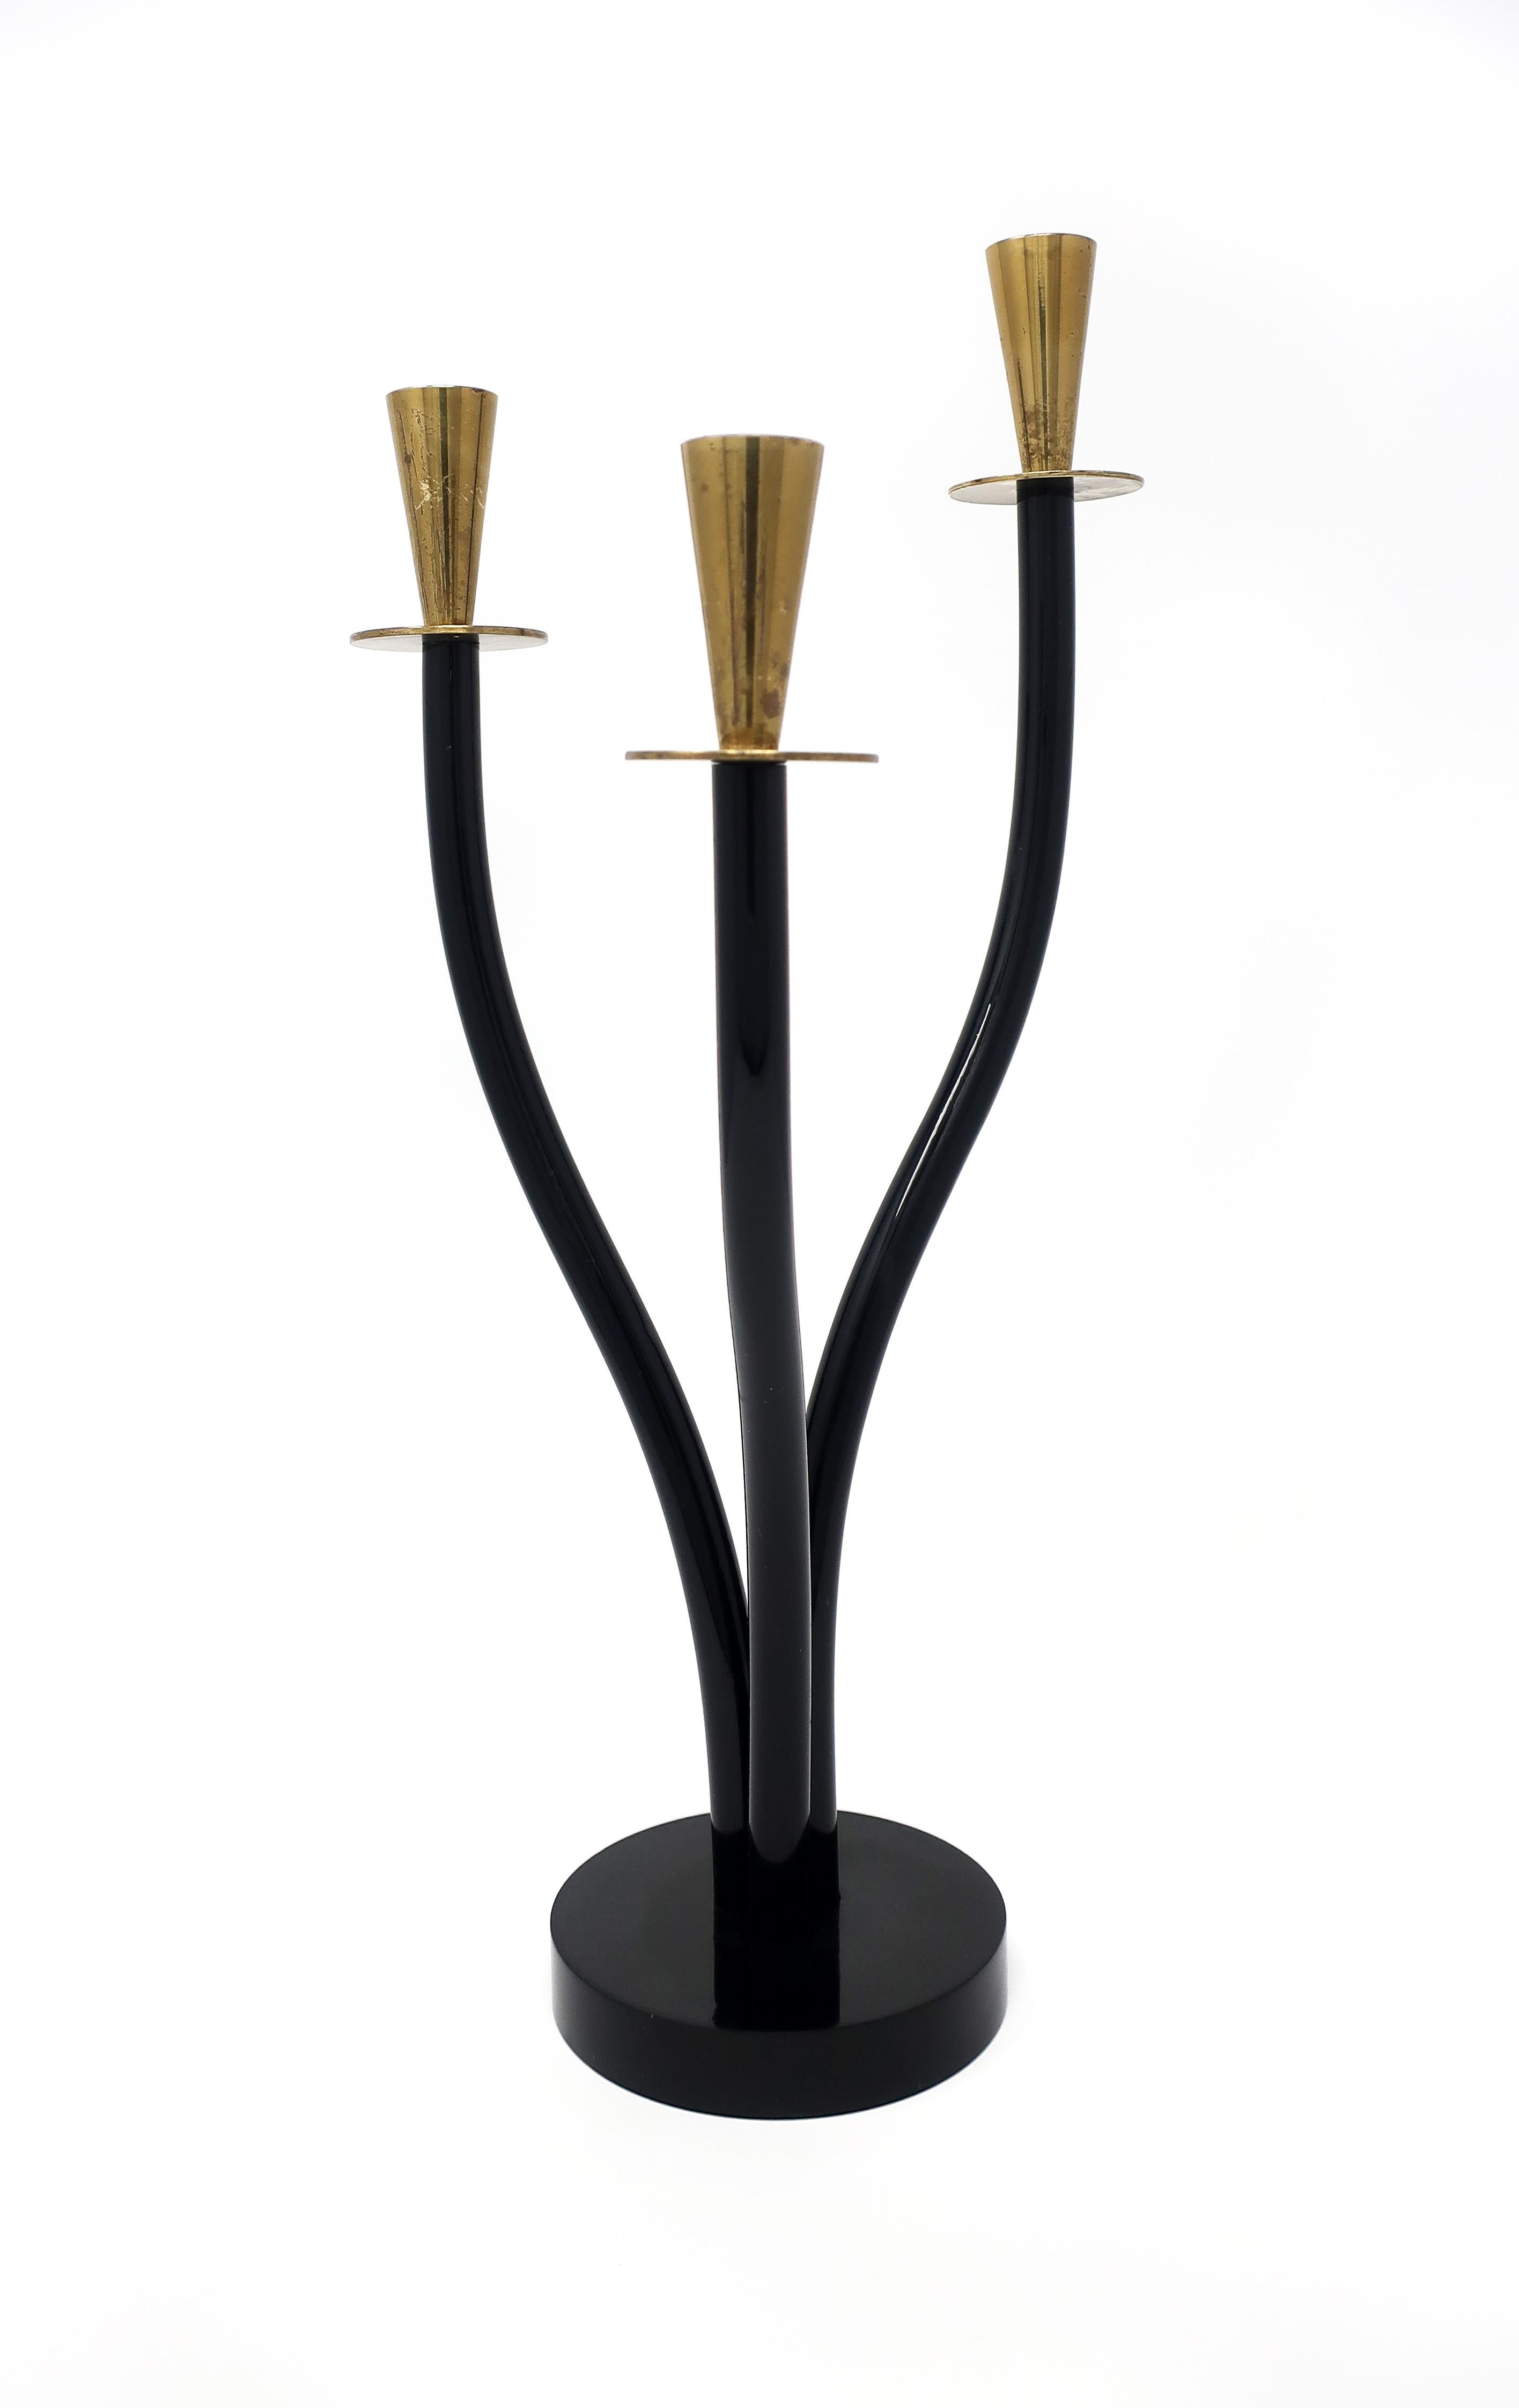 A vintage brass and black Lucite candleholder that screams Mid-Century Modern. Plantlike in form and reminiscent of a flower in bloom, the three curved stems, set into a round black acrylic base, each has a brass cup and saucer candleholder on the